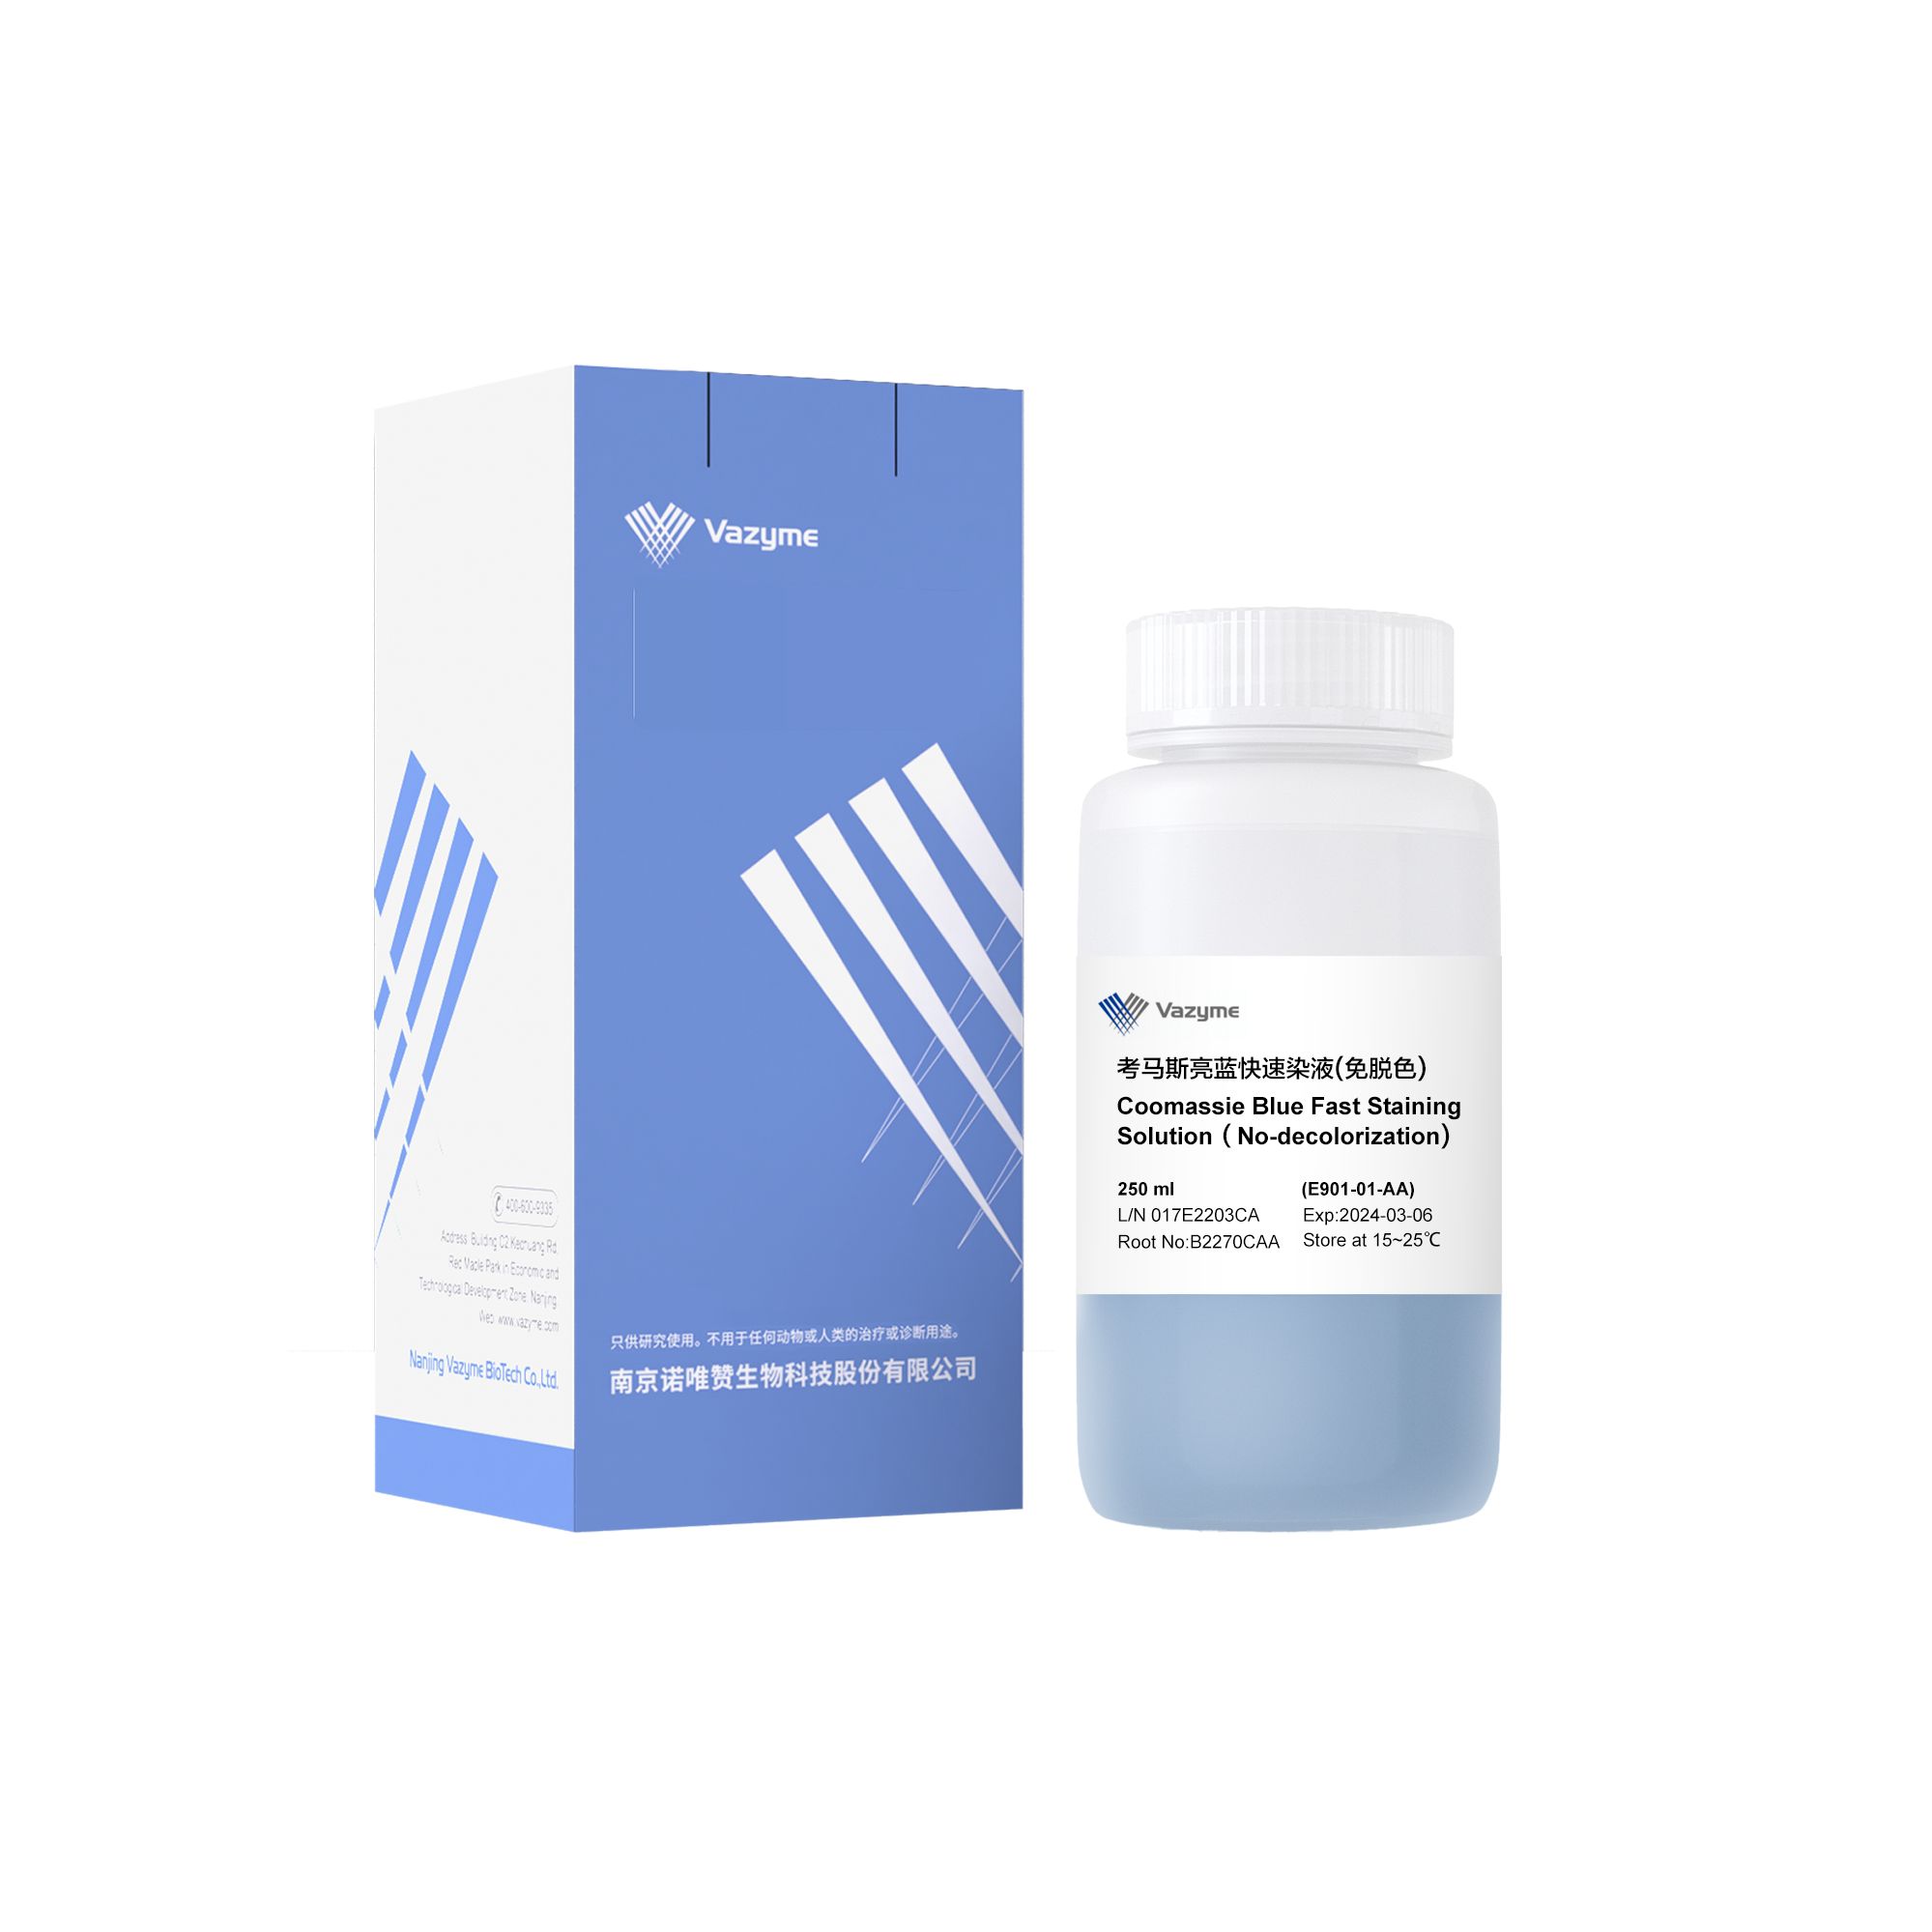 Coomassie Blue Fast Staining Solution (No-decolorization)(E901)